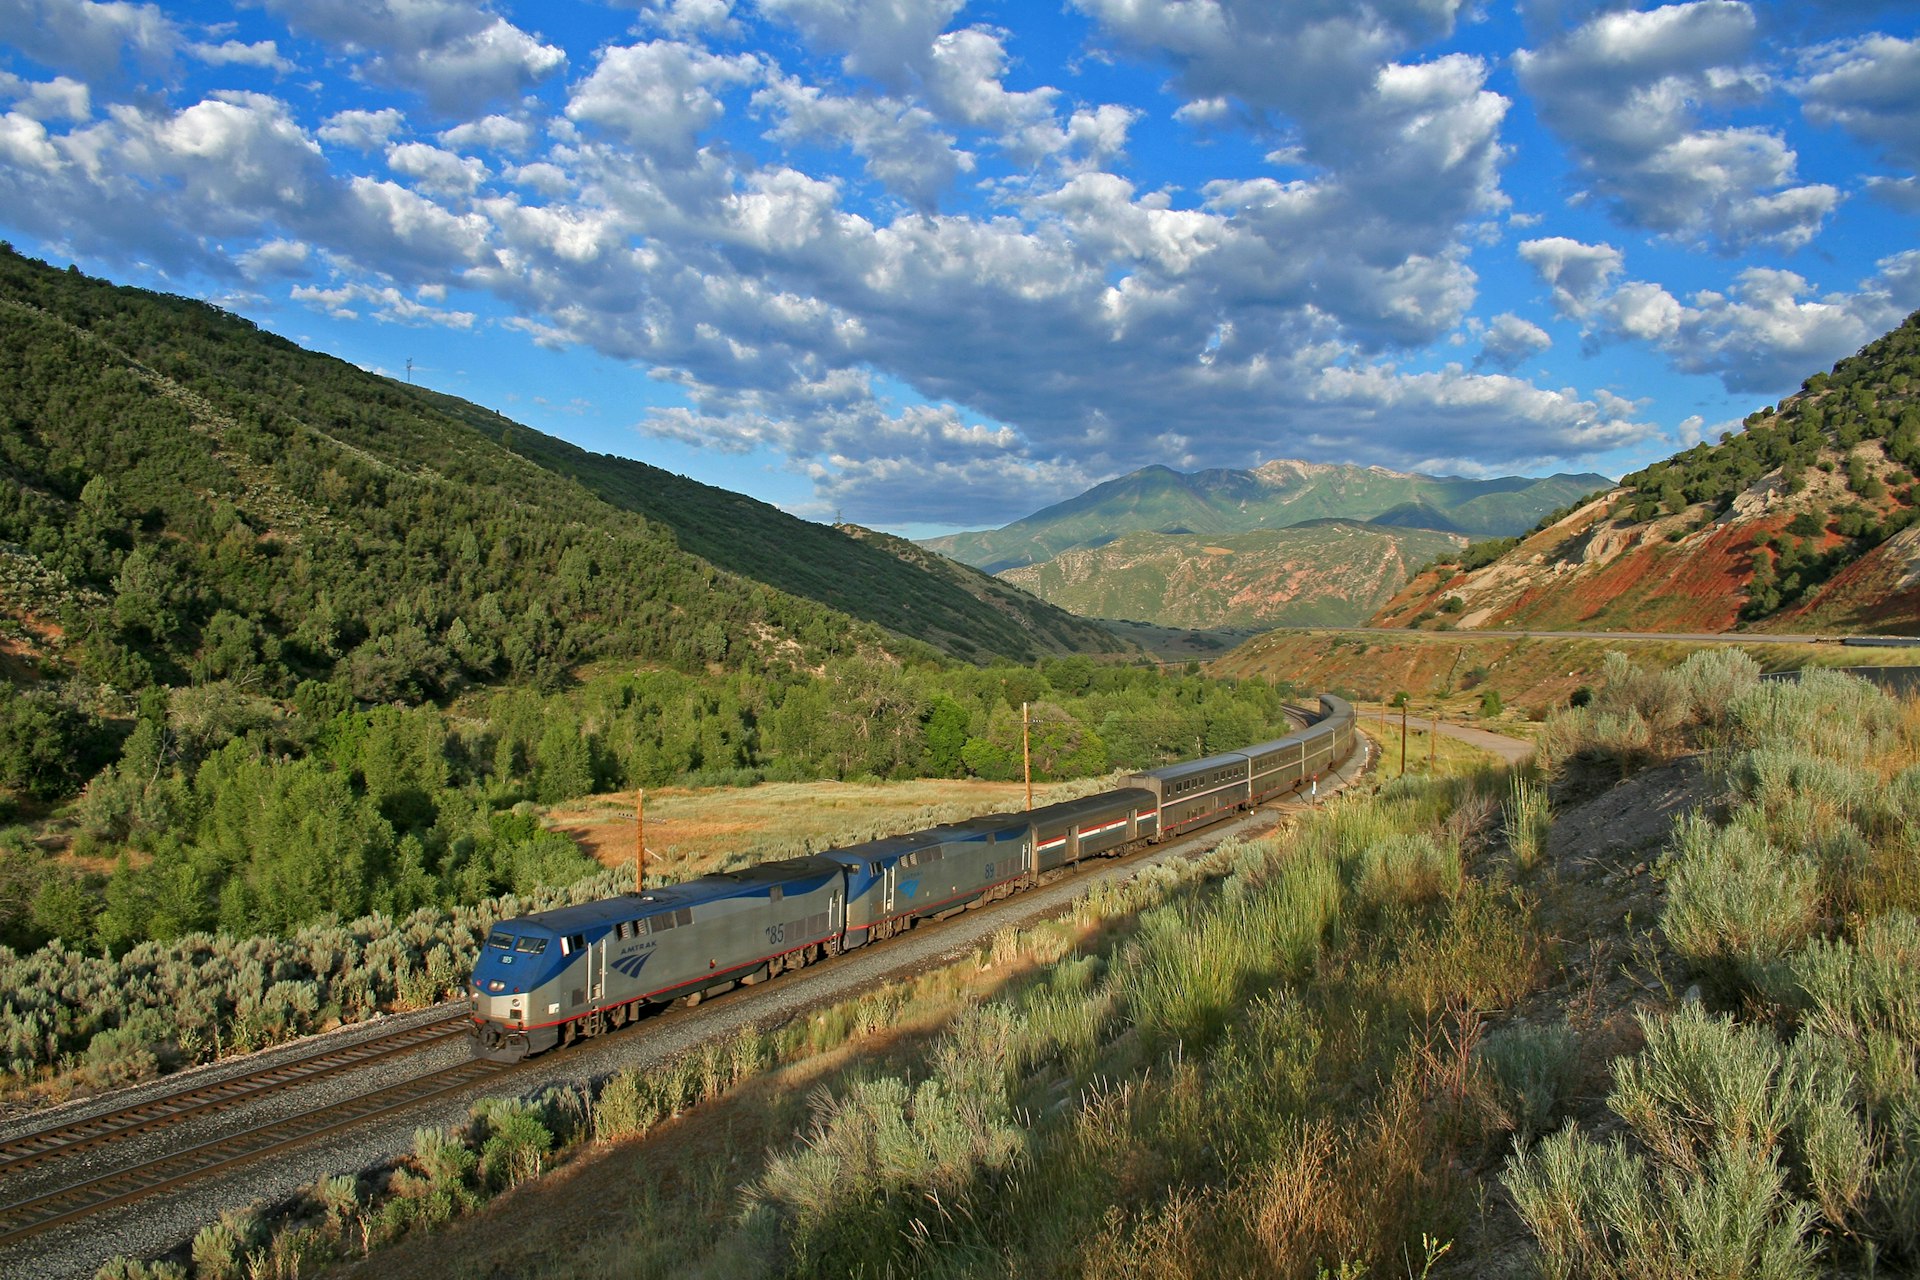 A train passing through a green landscape with blue skies